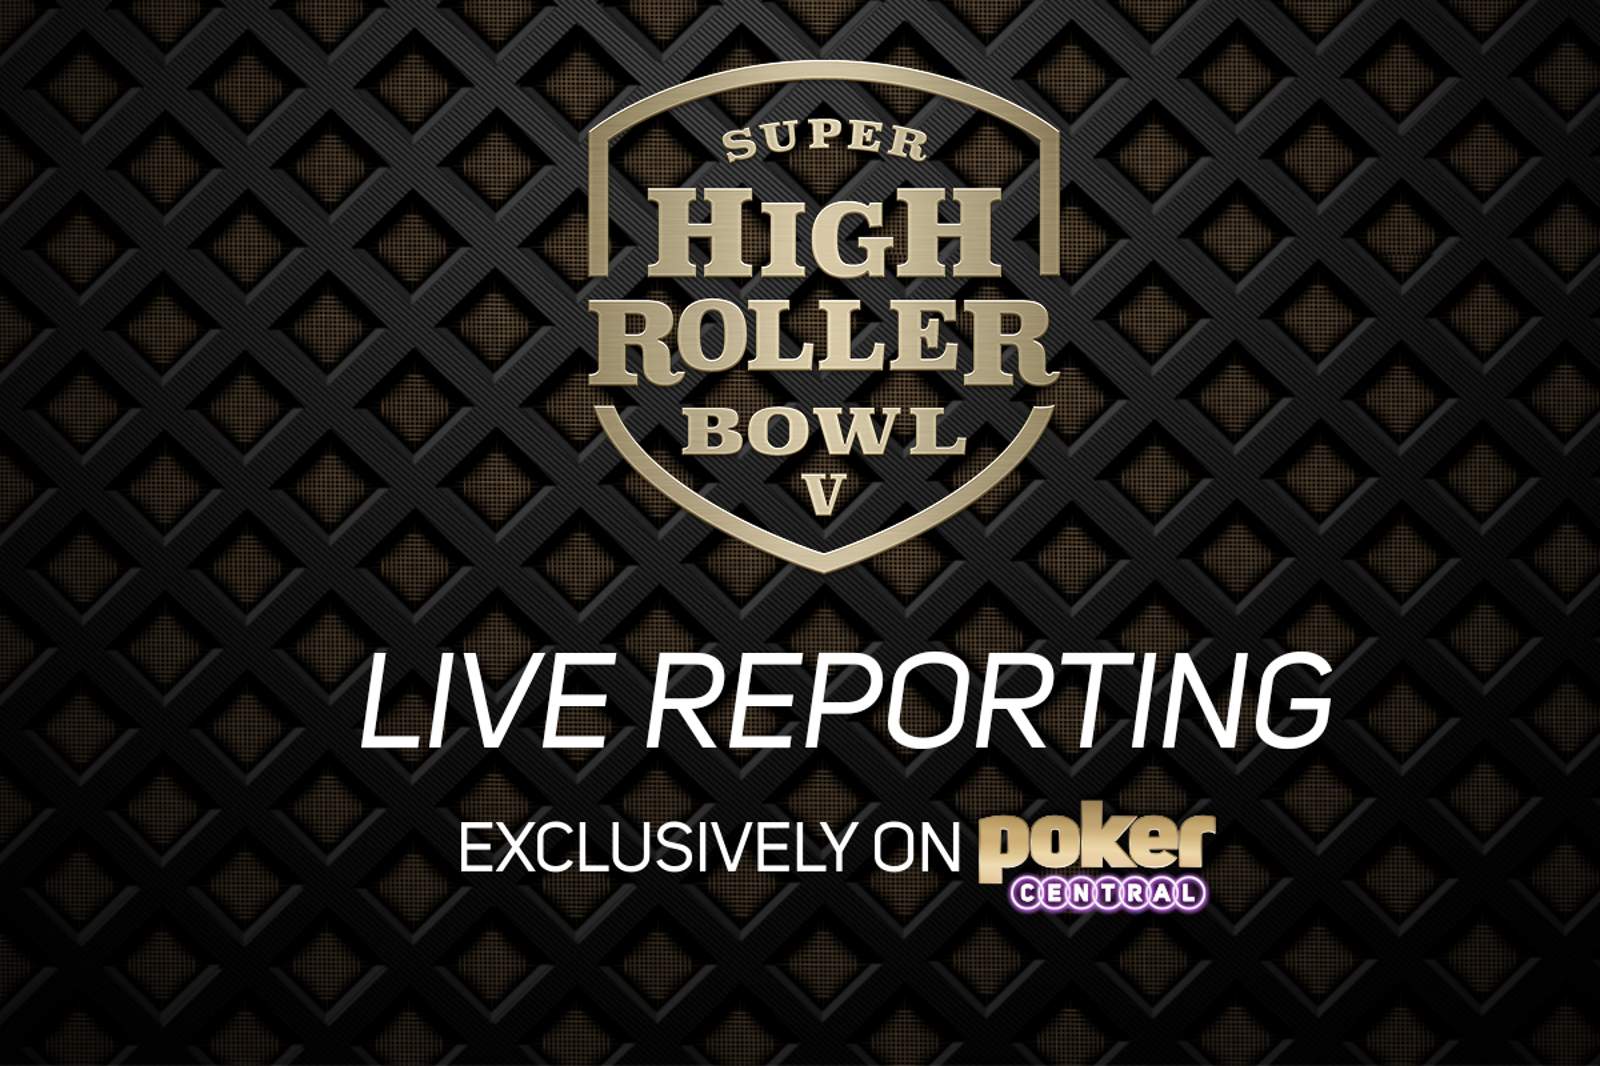 Follow Poker Central's Exclusive Live Reporting of Super High Roller Bowl V!